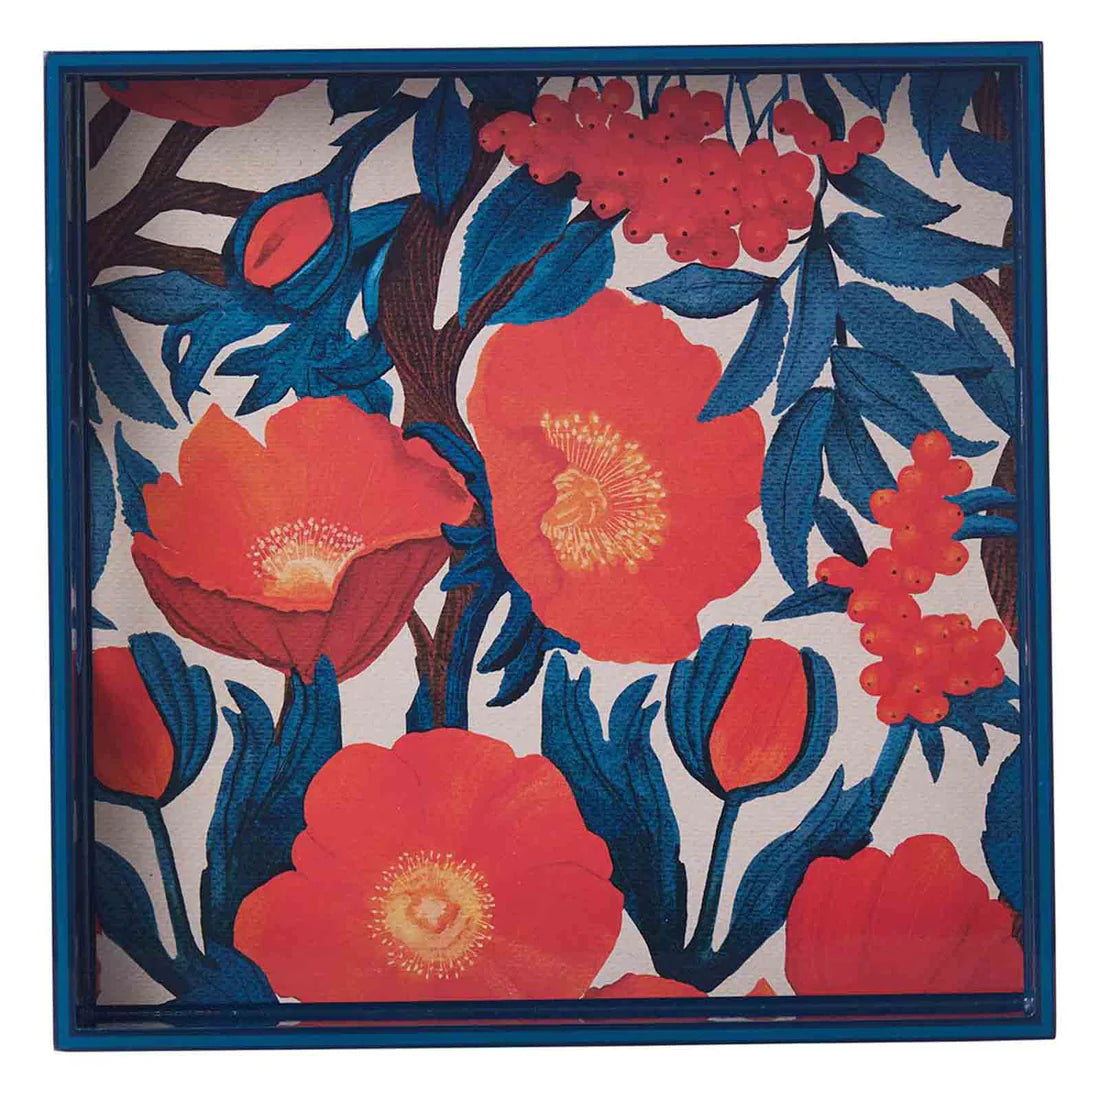 ICELANDIC POPPY 15" SQUARE LACQUER ART SERVING TRAY